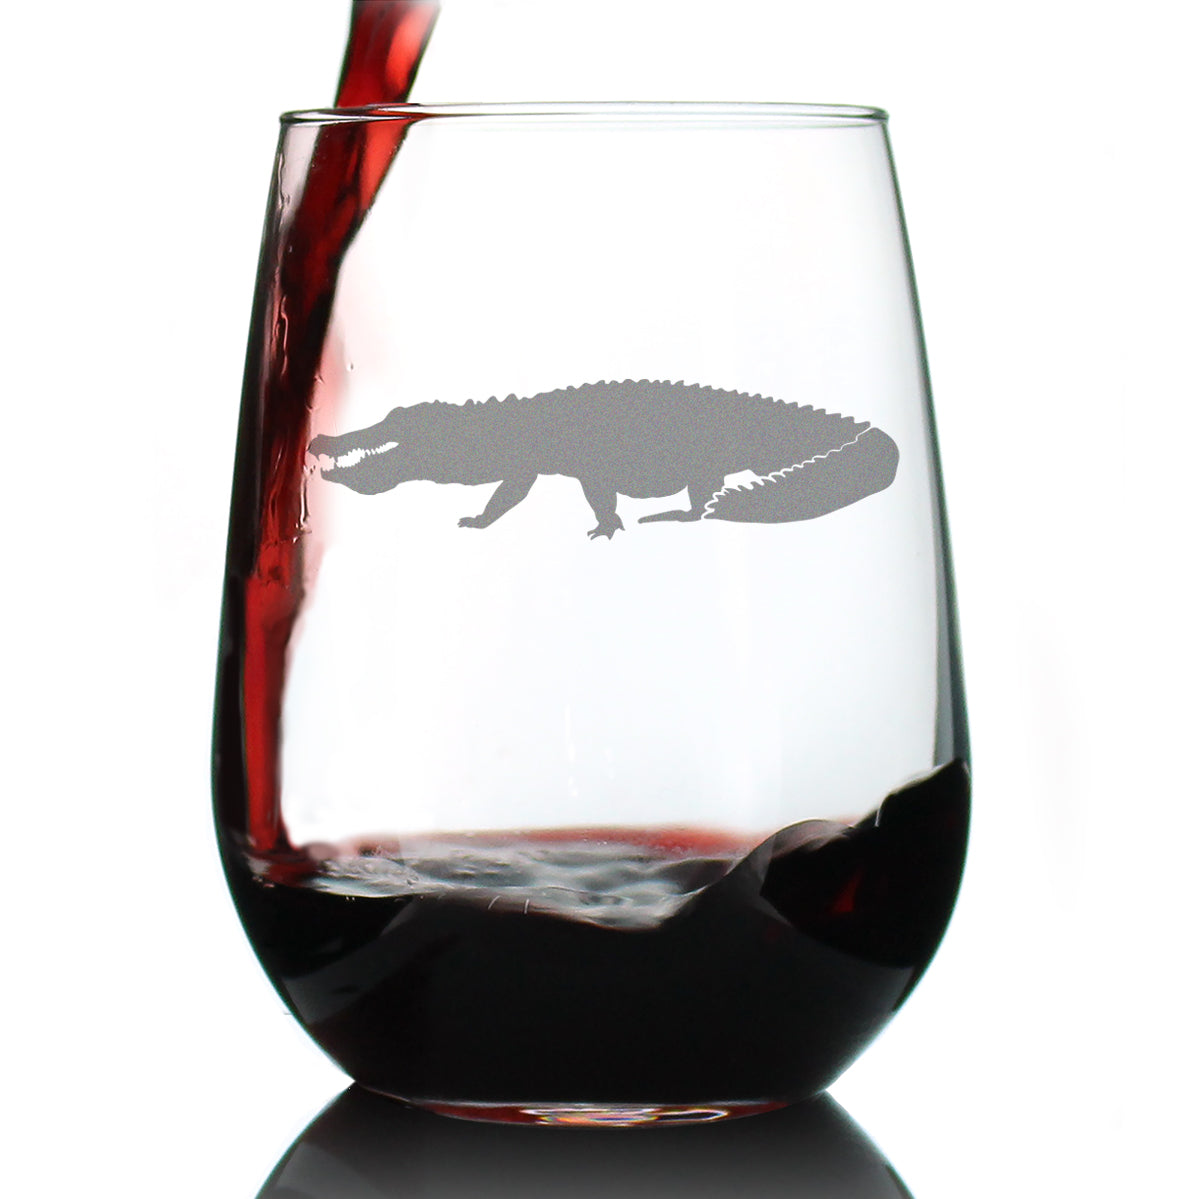 Alligator Stemless Wine Glass - Unique Exotic Animal Gifts for Alligator Lovers - Large 17 Oz Glass